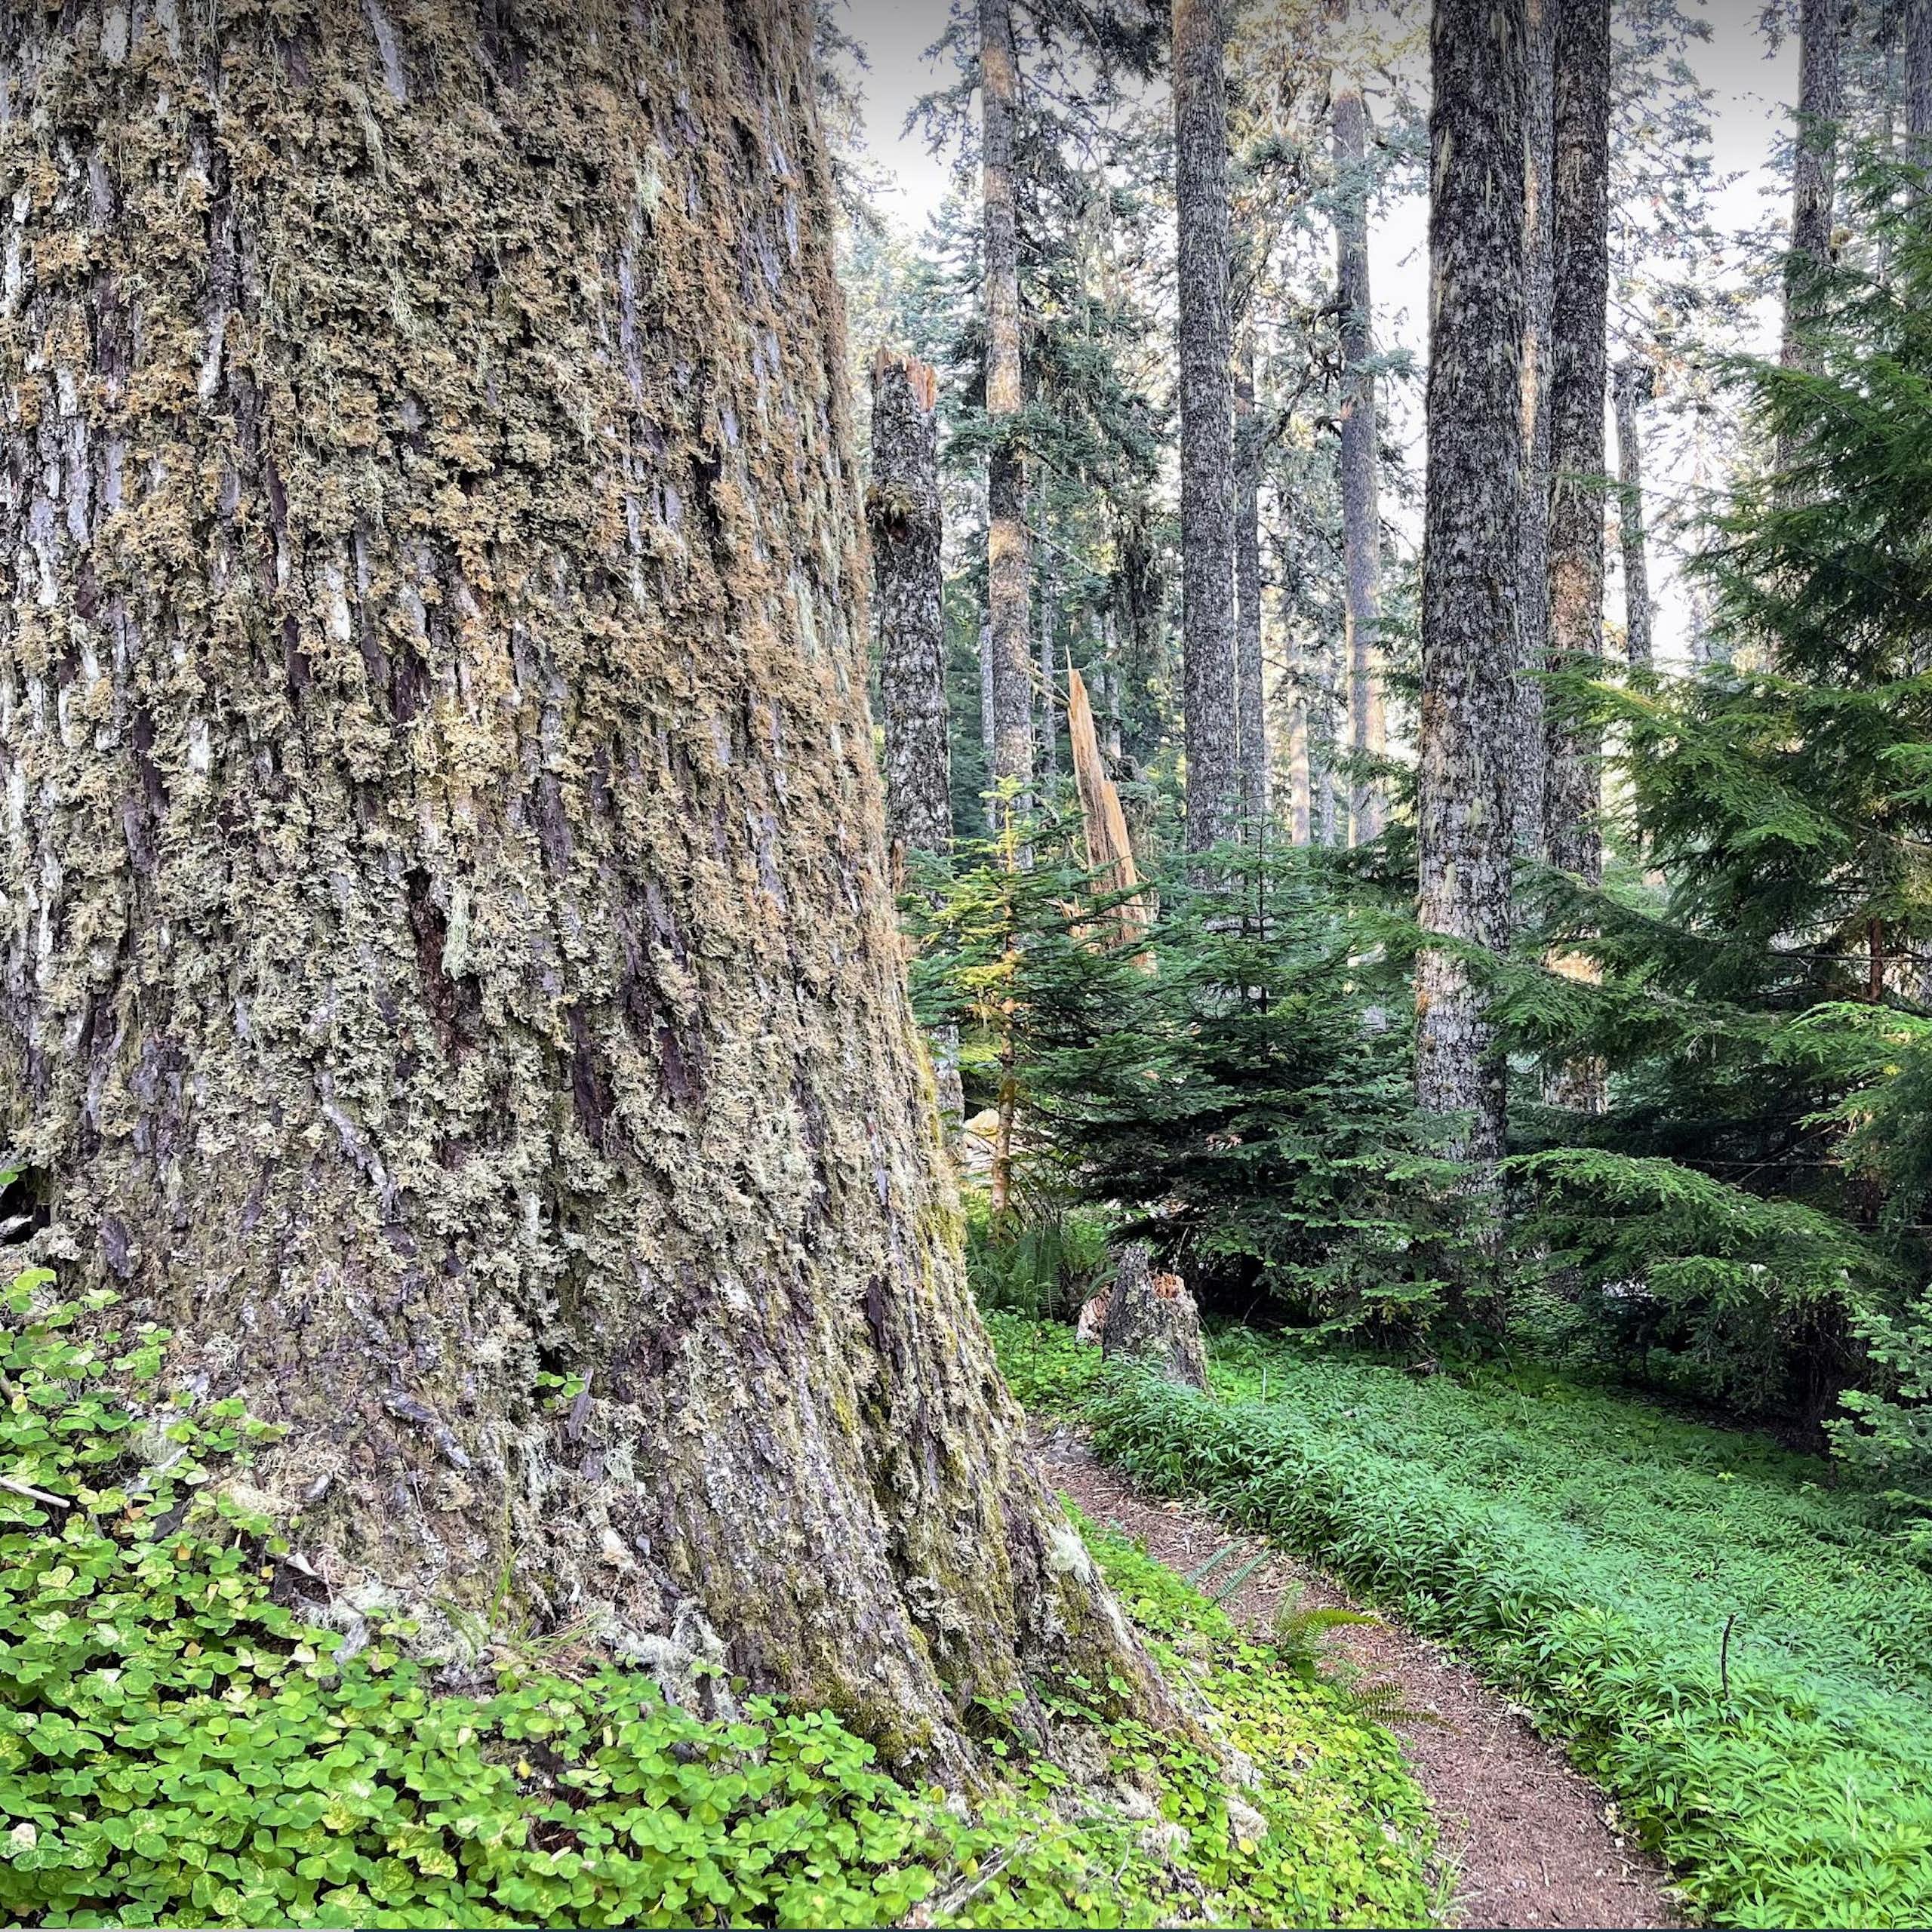 A narrow path curves aroudn the base of an enormous tree trunkand past smaller evergreen trees